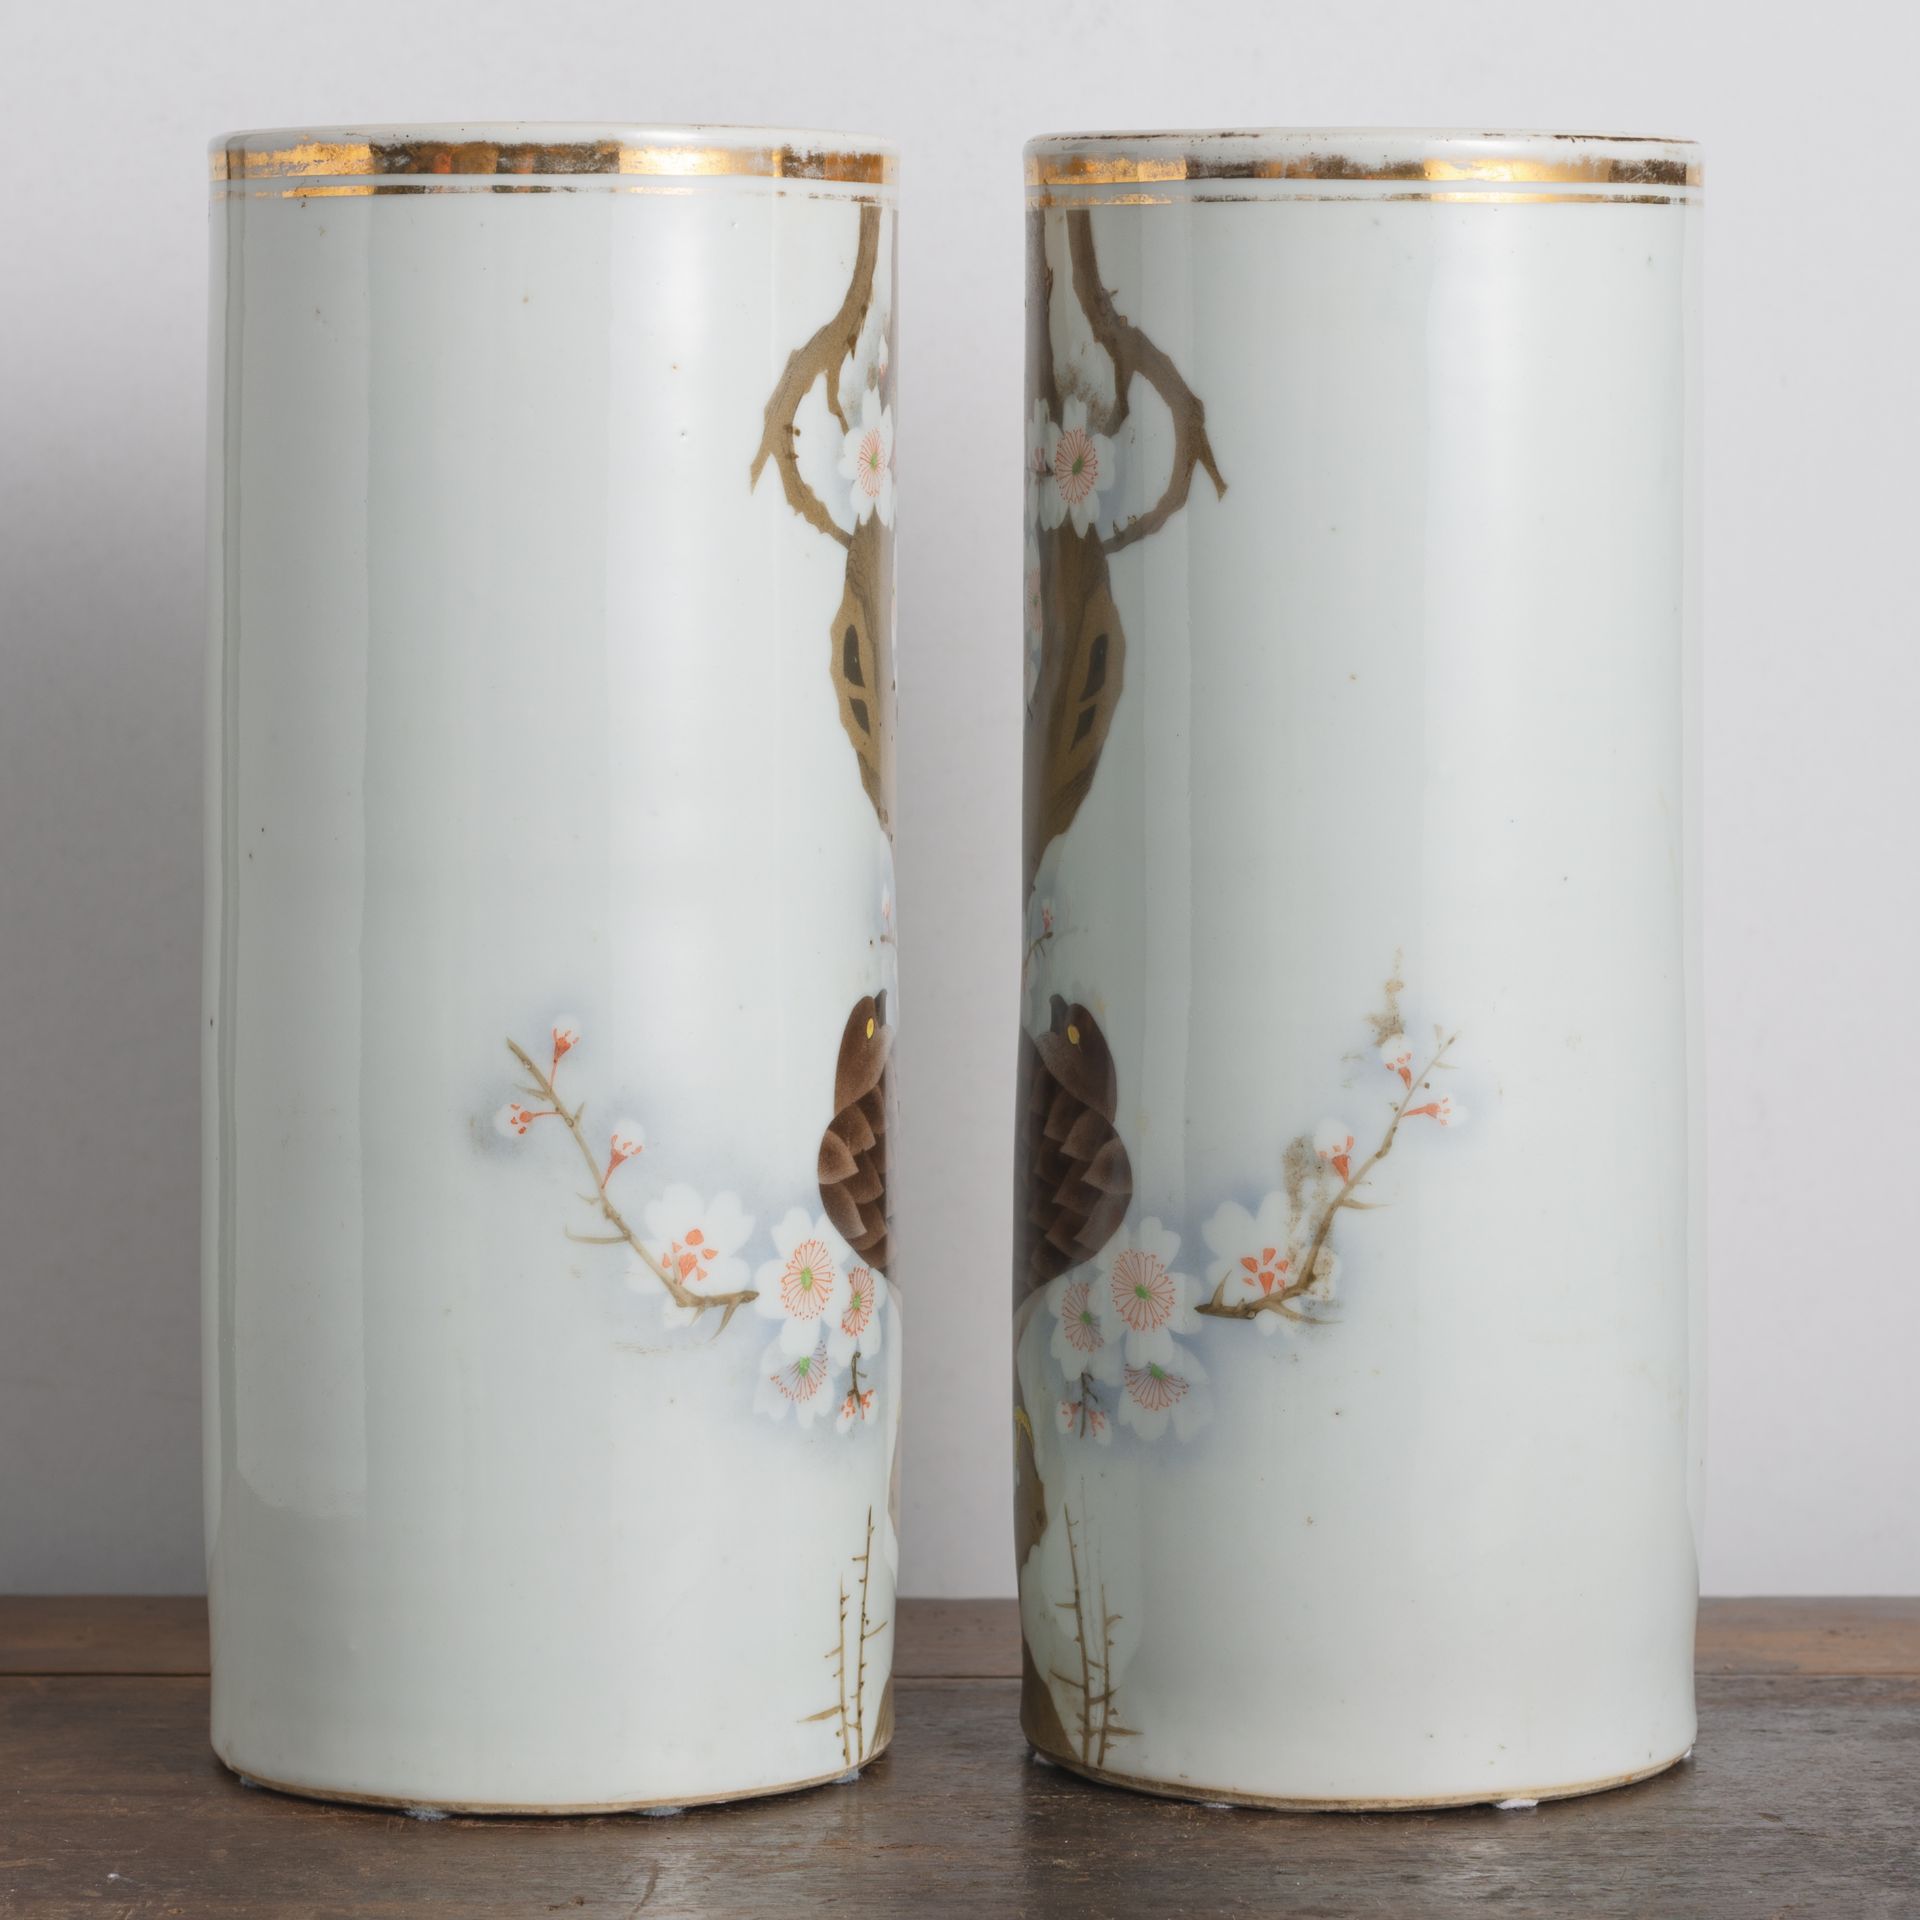 A PAIR OF CYLINDRICAL POLYCHROME BIRD OF PREY ON BRANCHES PORCELAIN VASES - Image 2 of 6